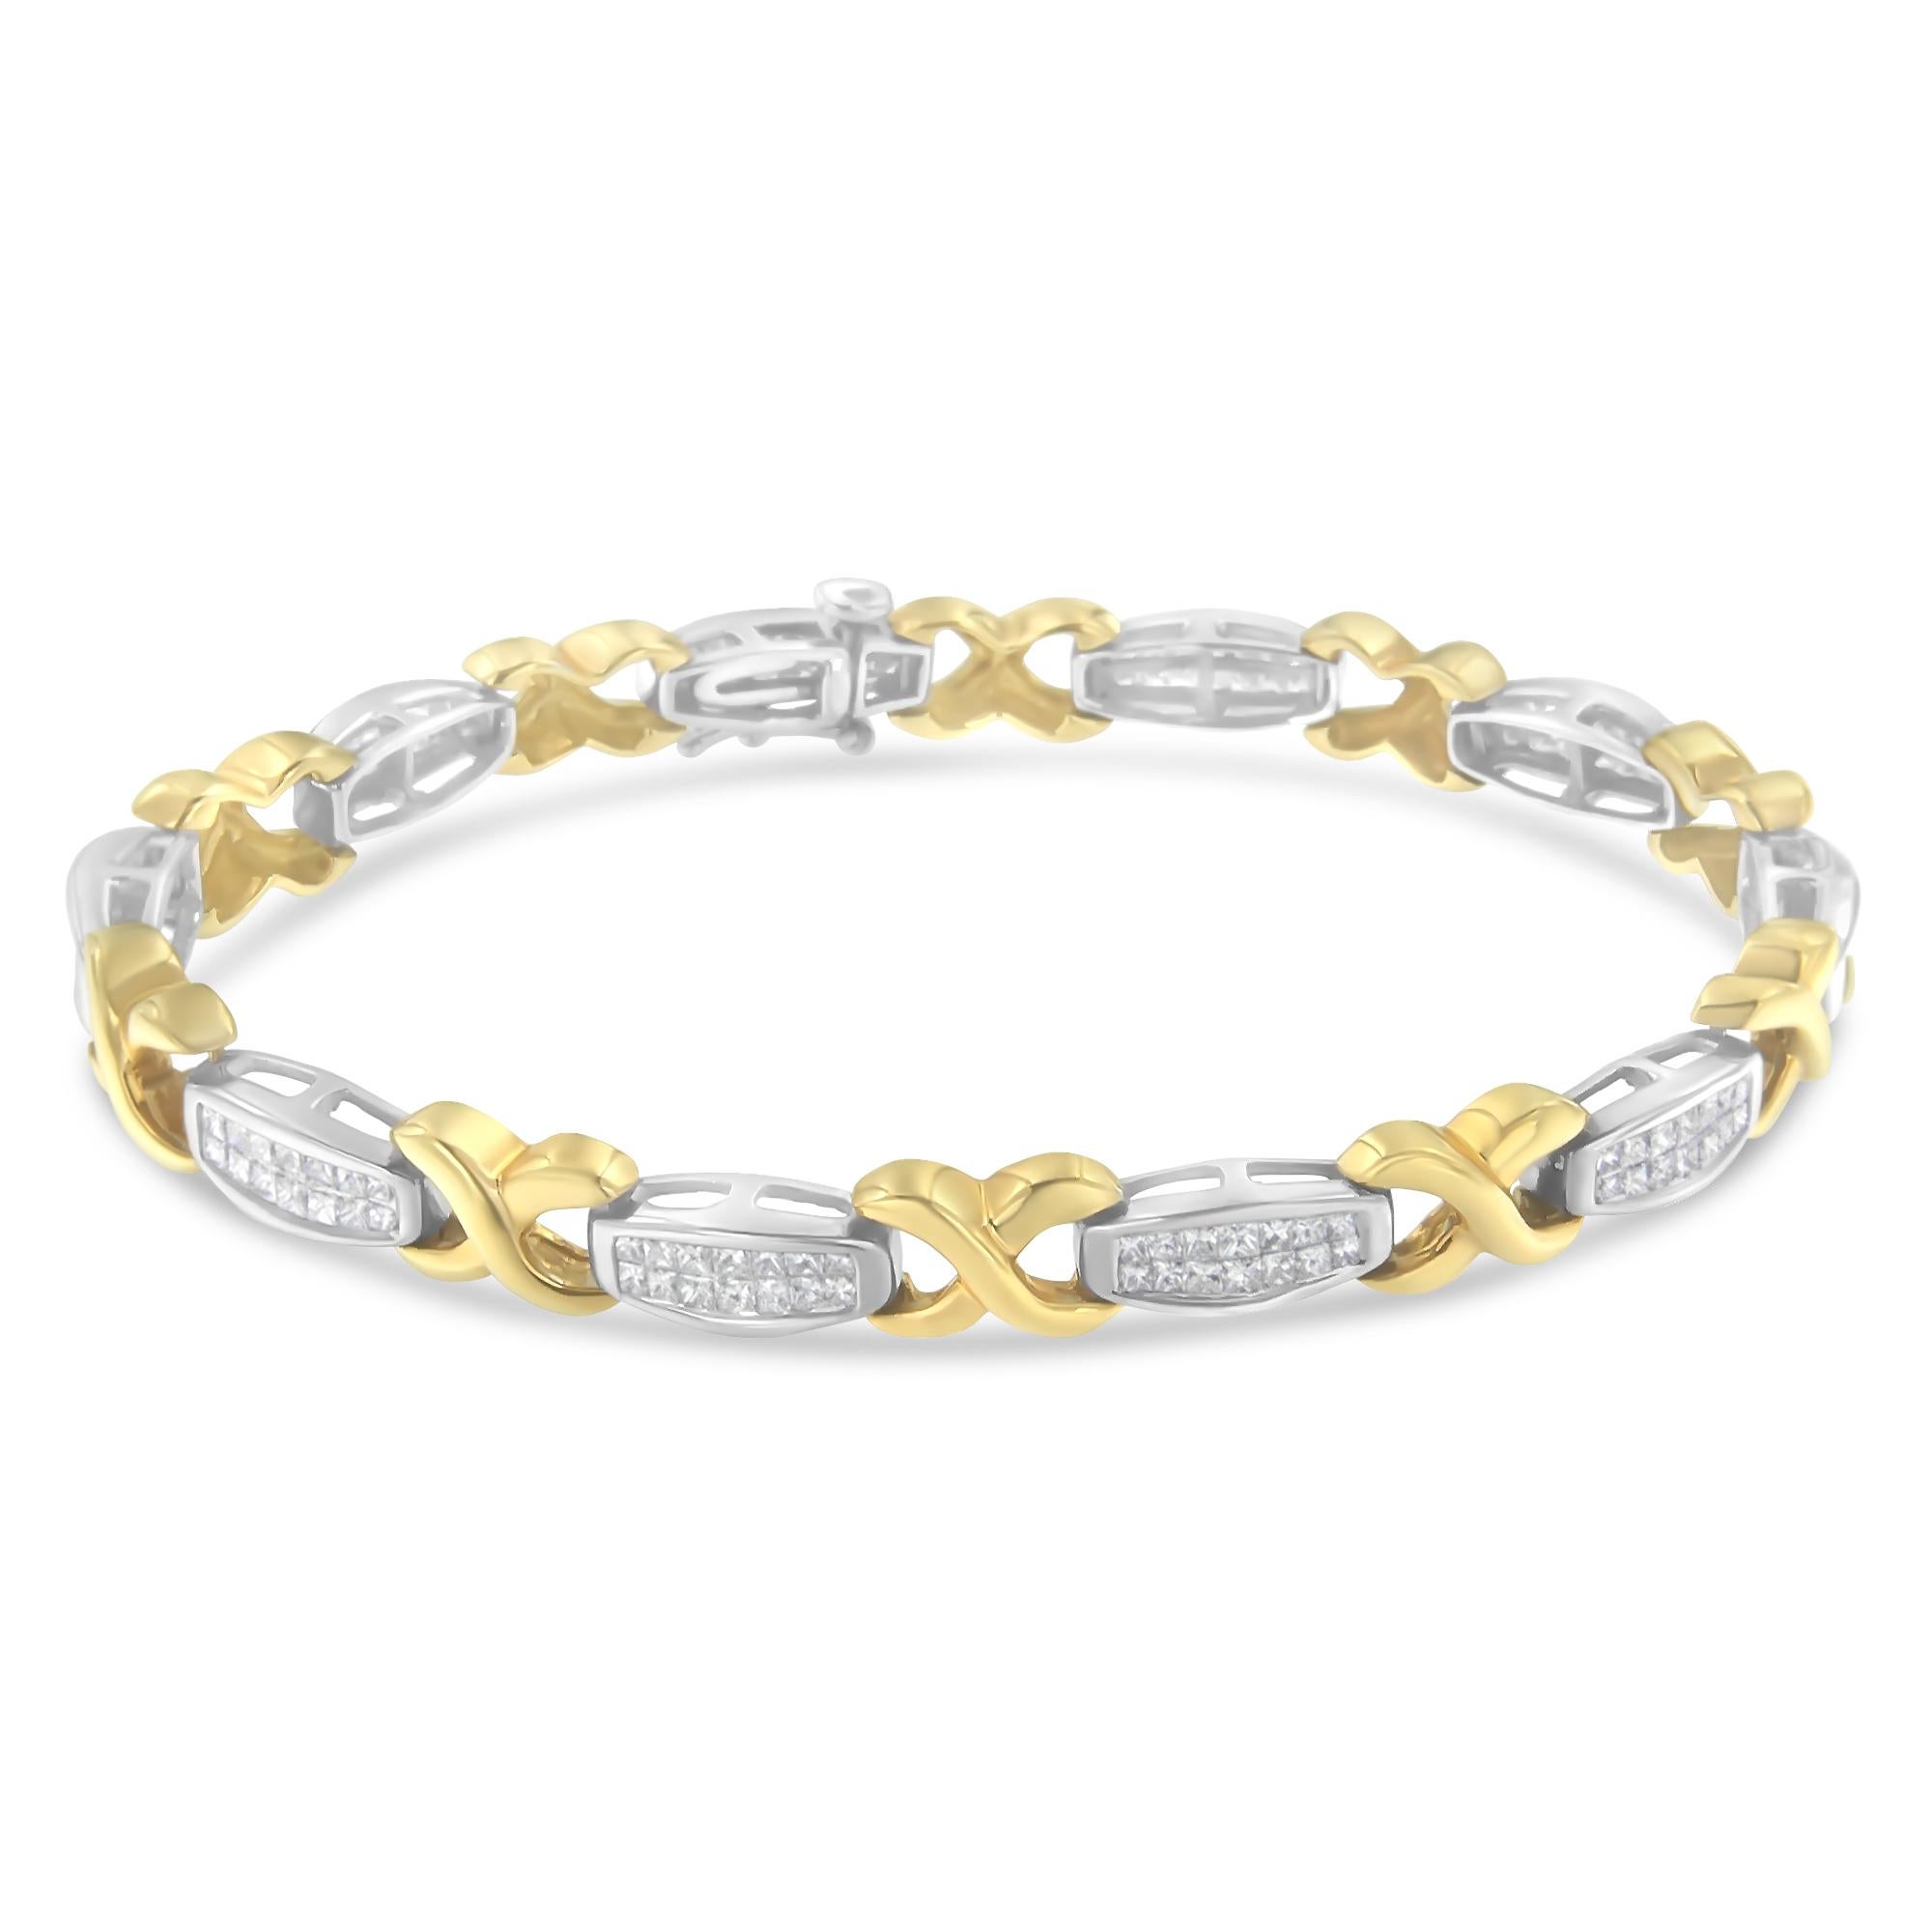 Fashioned in 14k yellow and white gold, this gorgeous bracelet twinkles with long rectangular white gold links embellished with sparkling princess cut, invisible set diamonds, alternating with yellow gold 